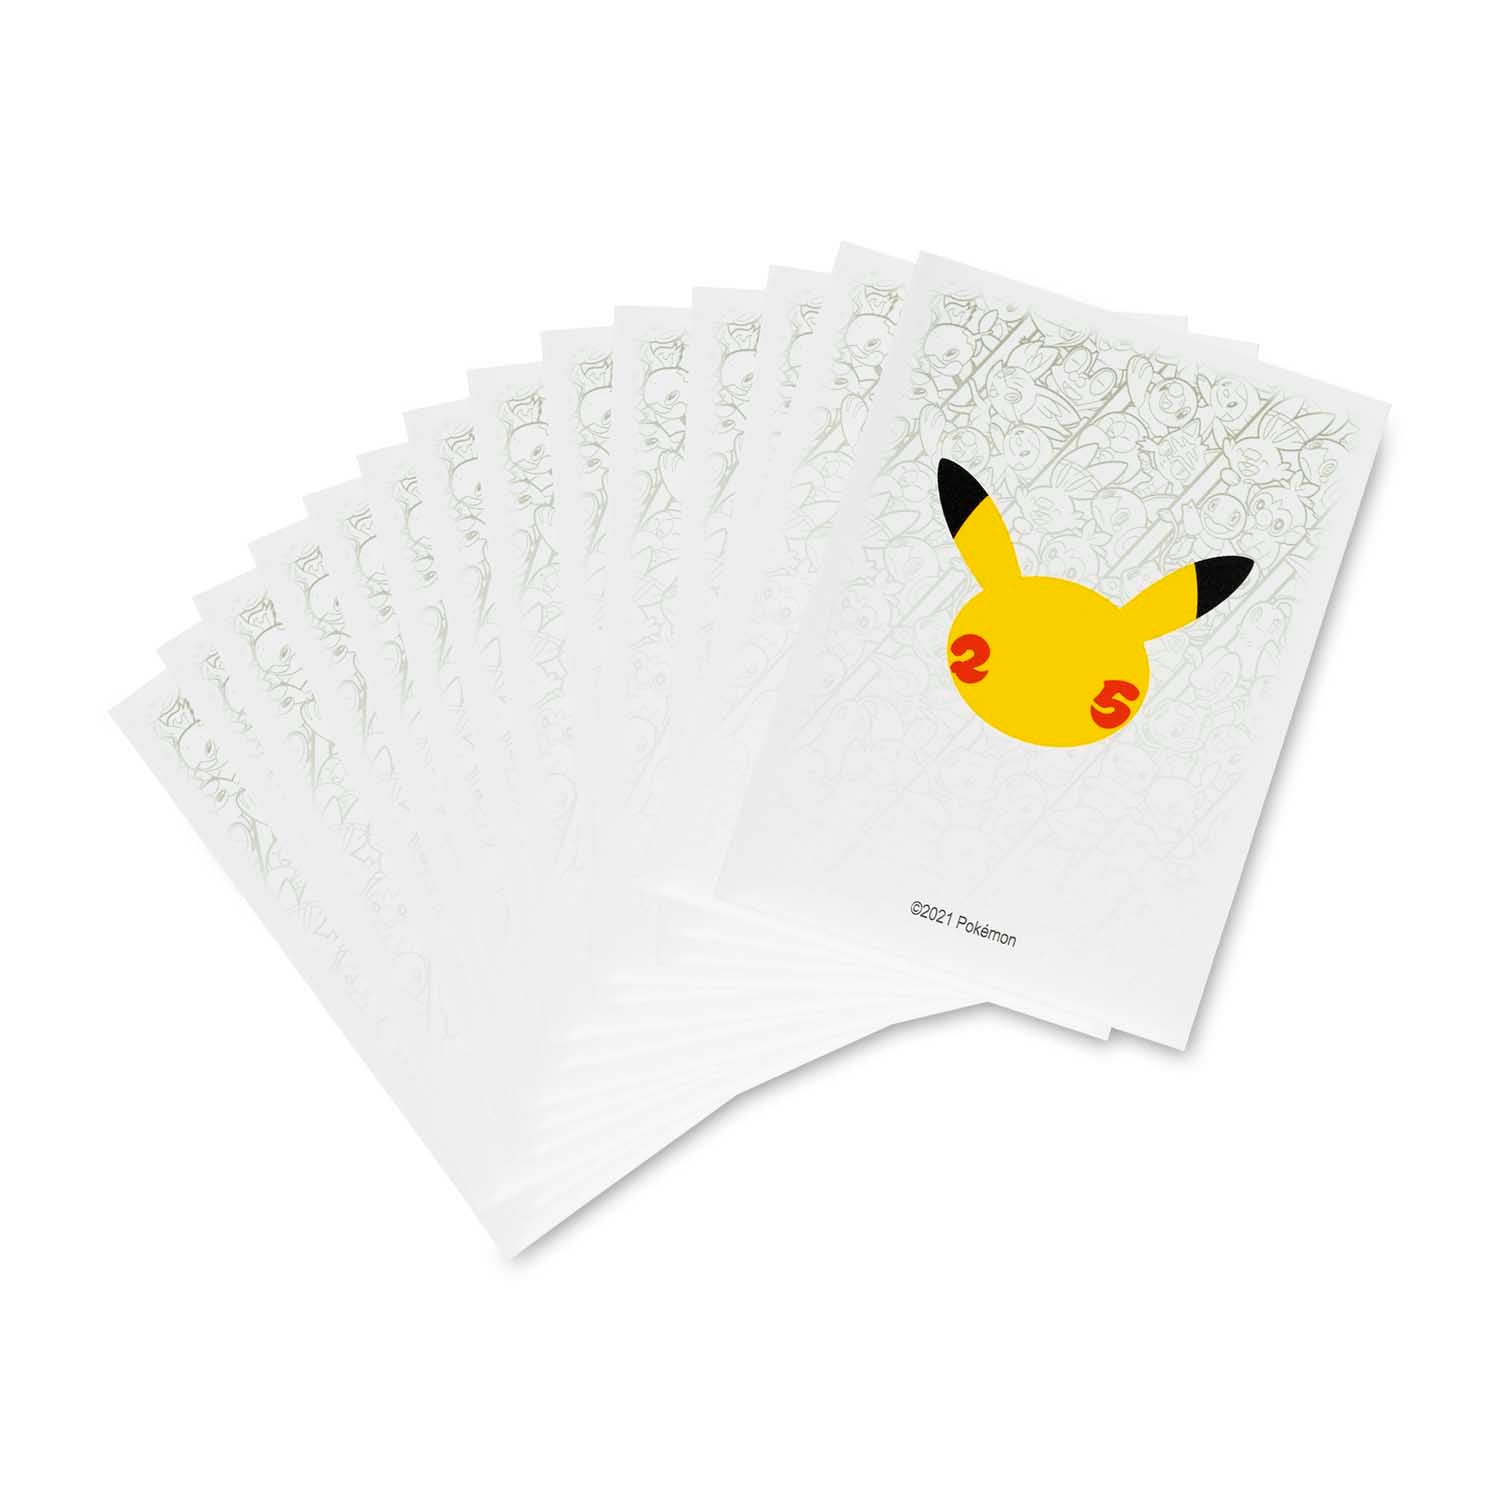 Celebrations: 25th Anniversary - Card Sleeves (White) | Total Play